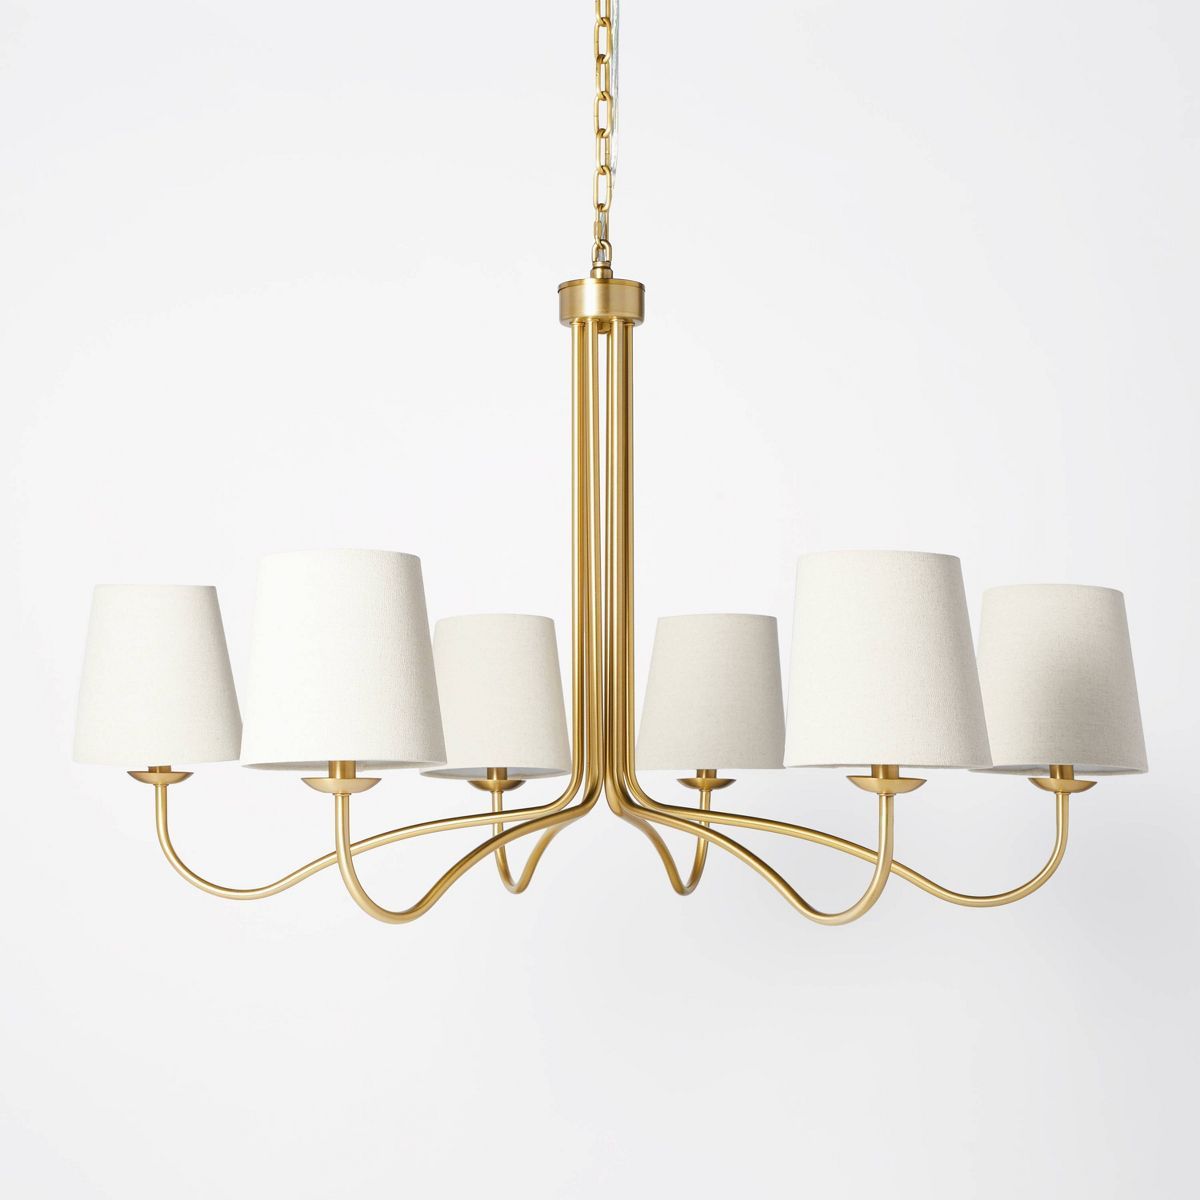 6-Arm Candelabra Chandelier Ceiling Light Brass Finish - Hearth & Hand™ with Magnolia | Target